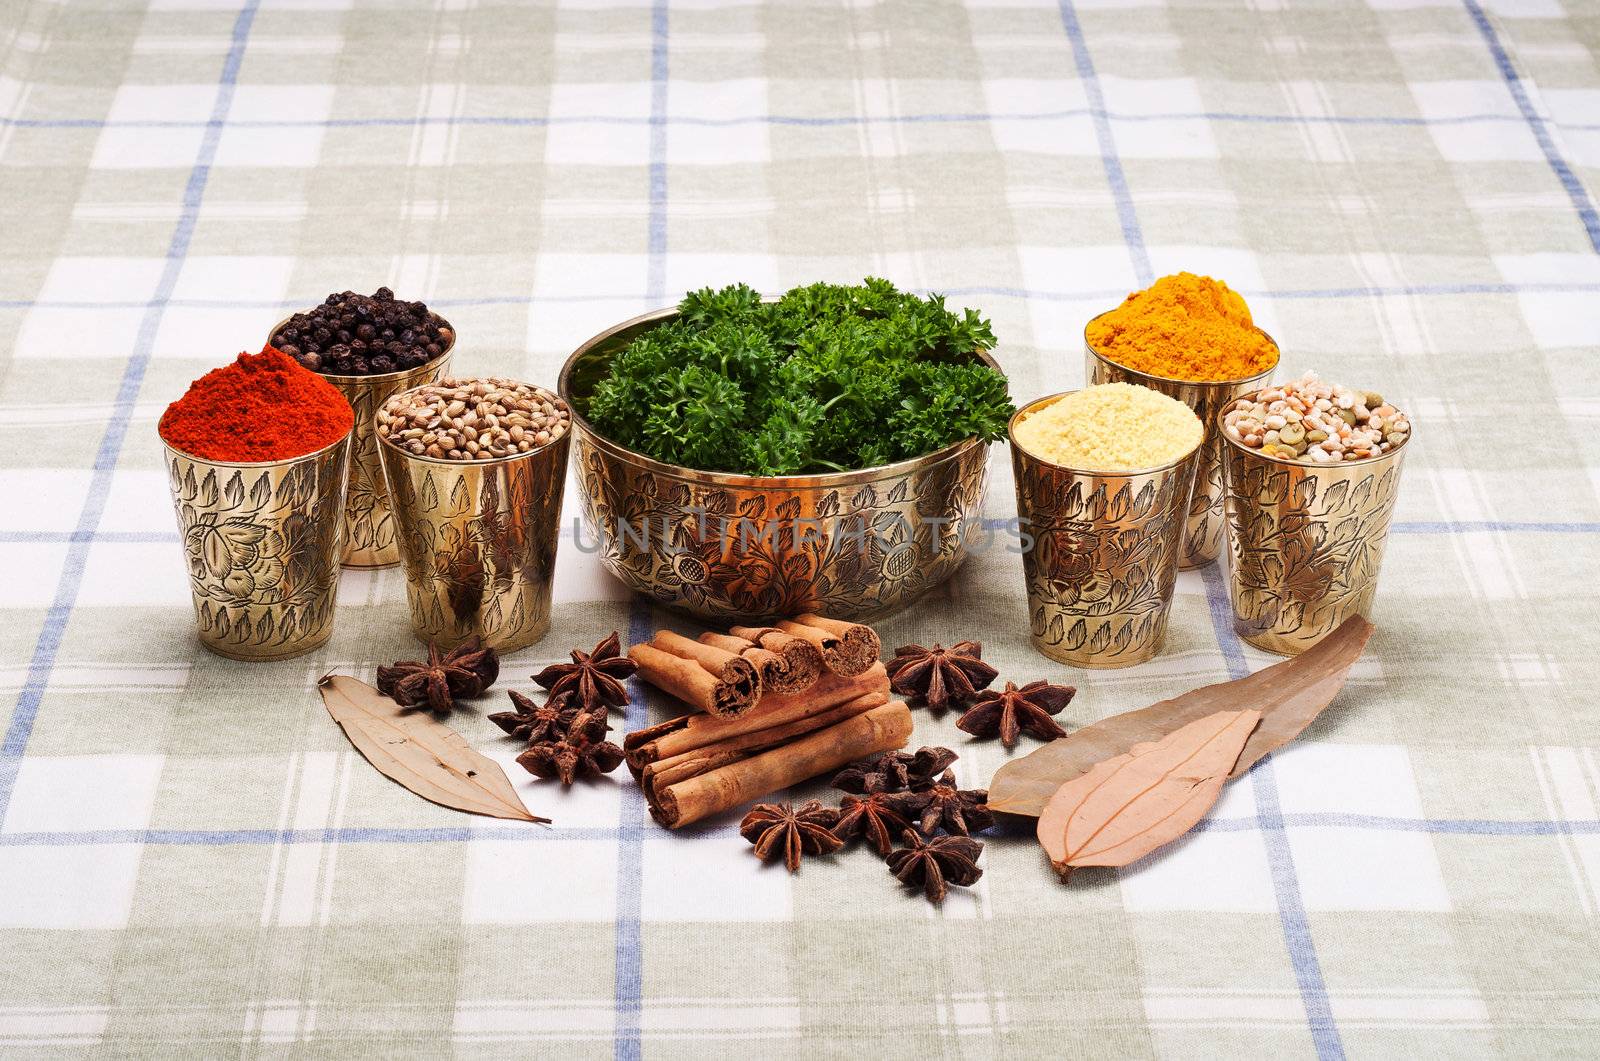 Colorful arrangement of Indian spices in brass containers with parsley